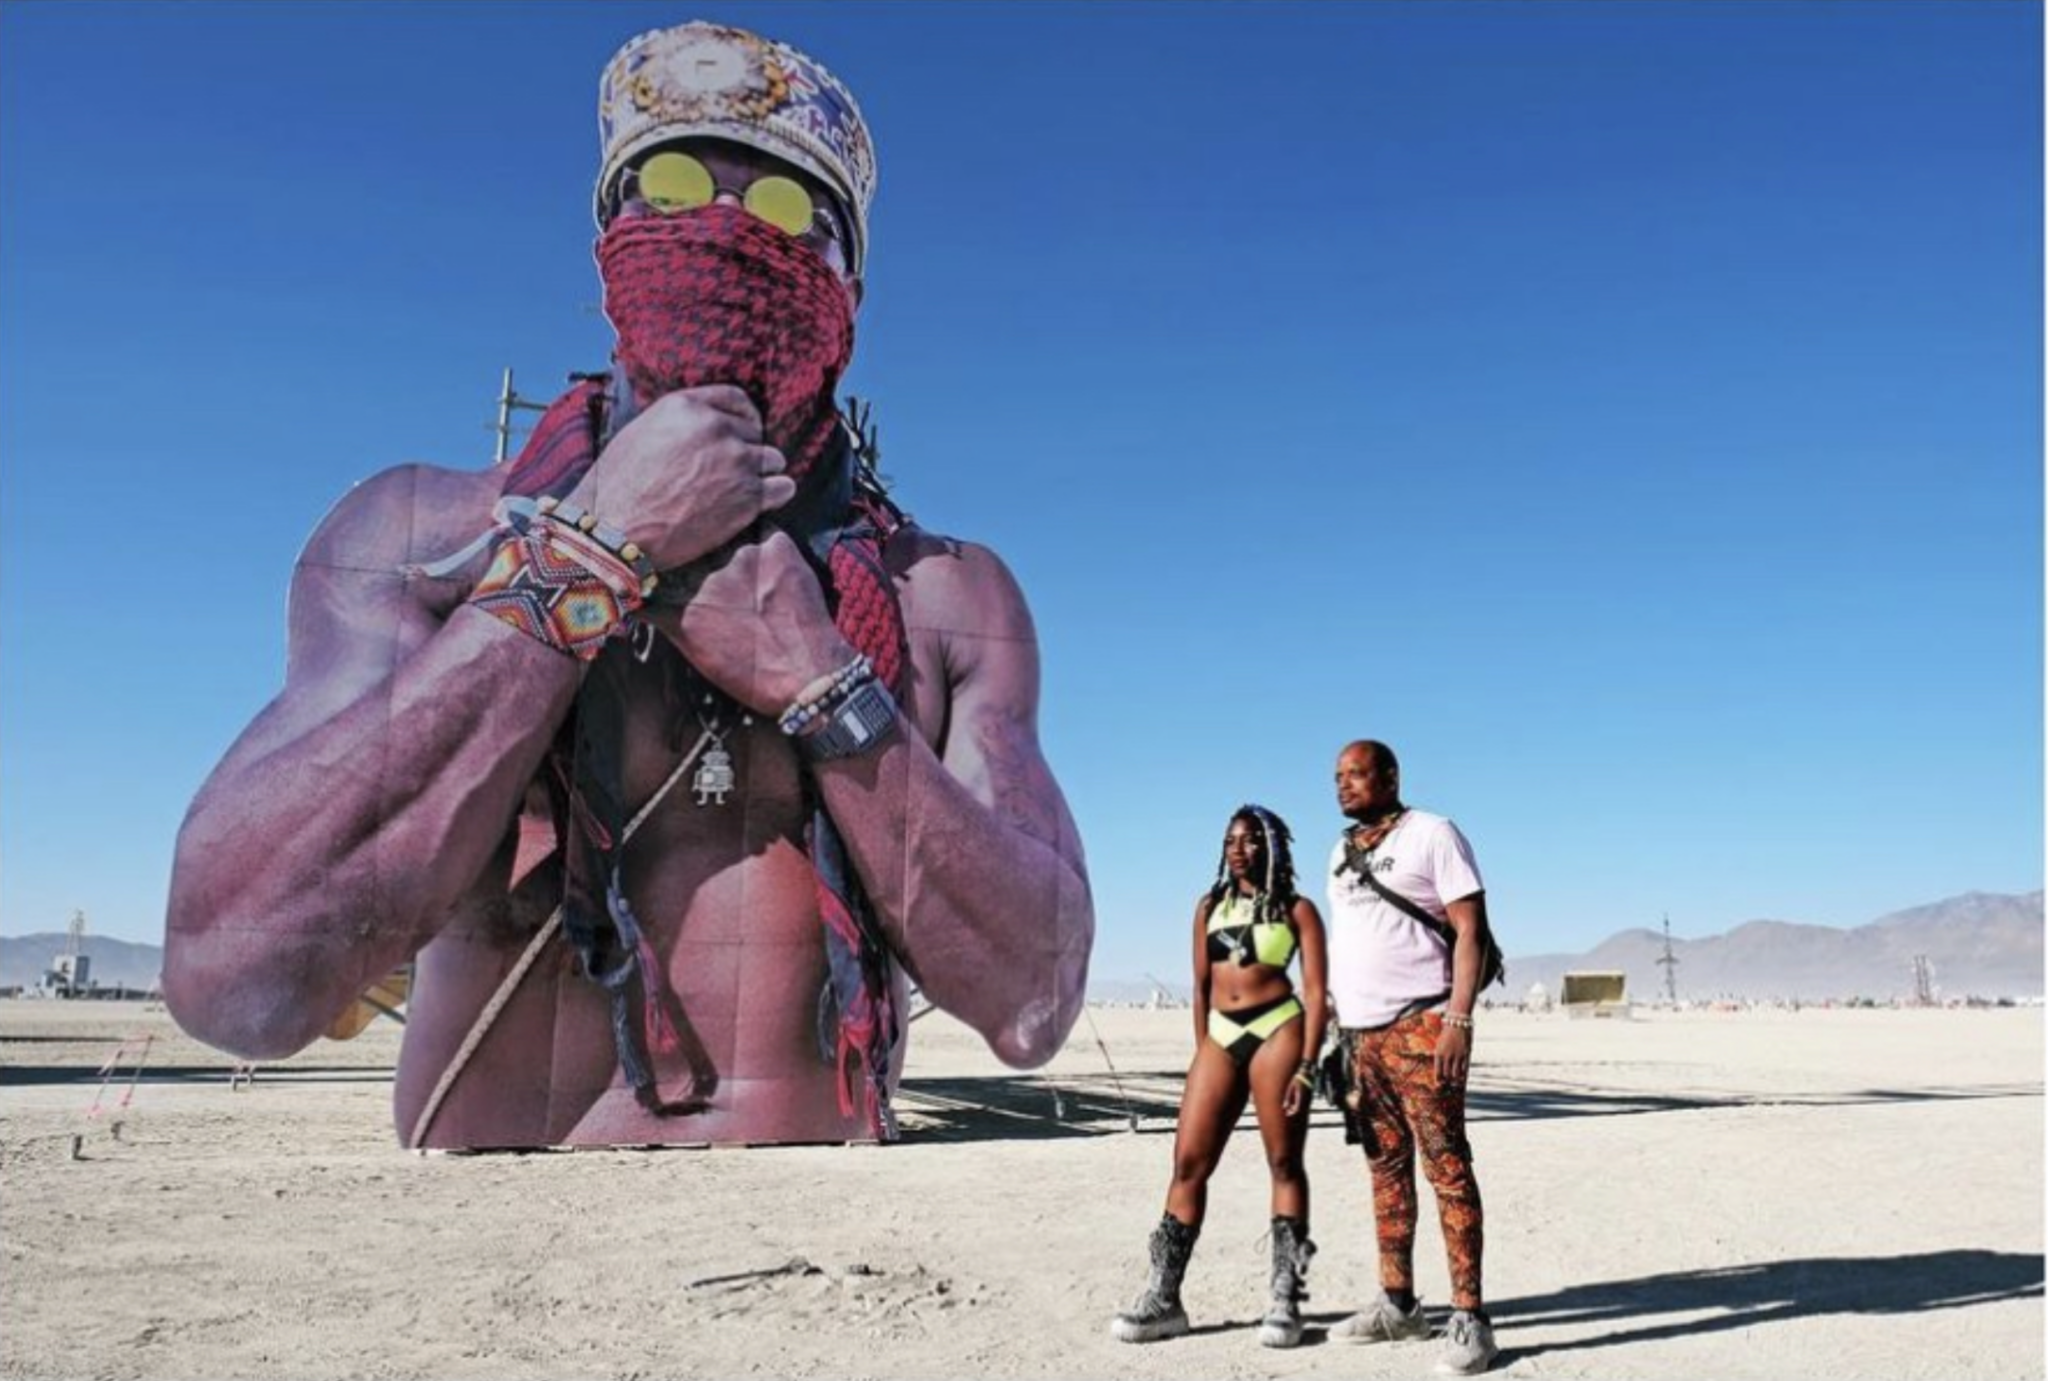 Burning Man Nudes: Embracing the Heat of the Moment